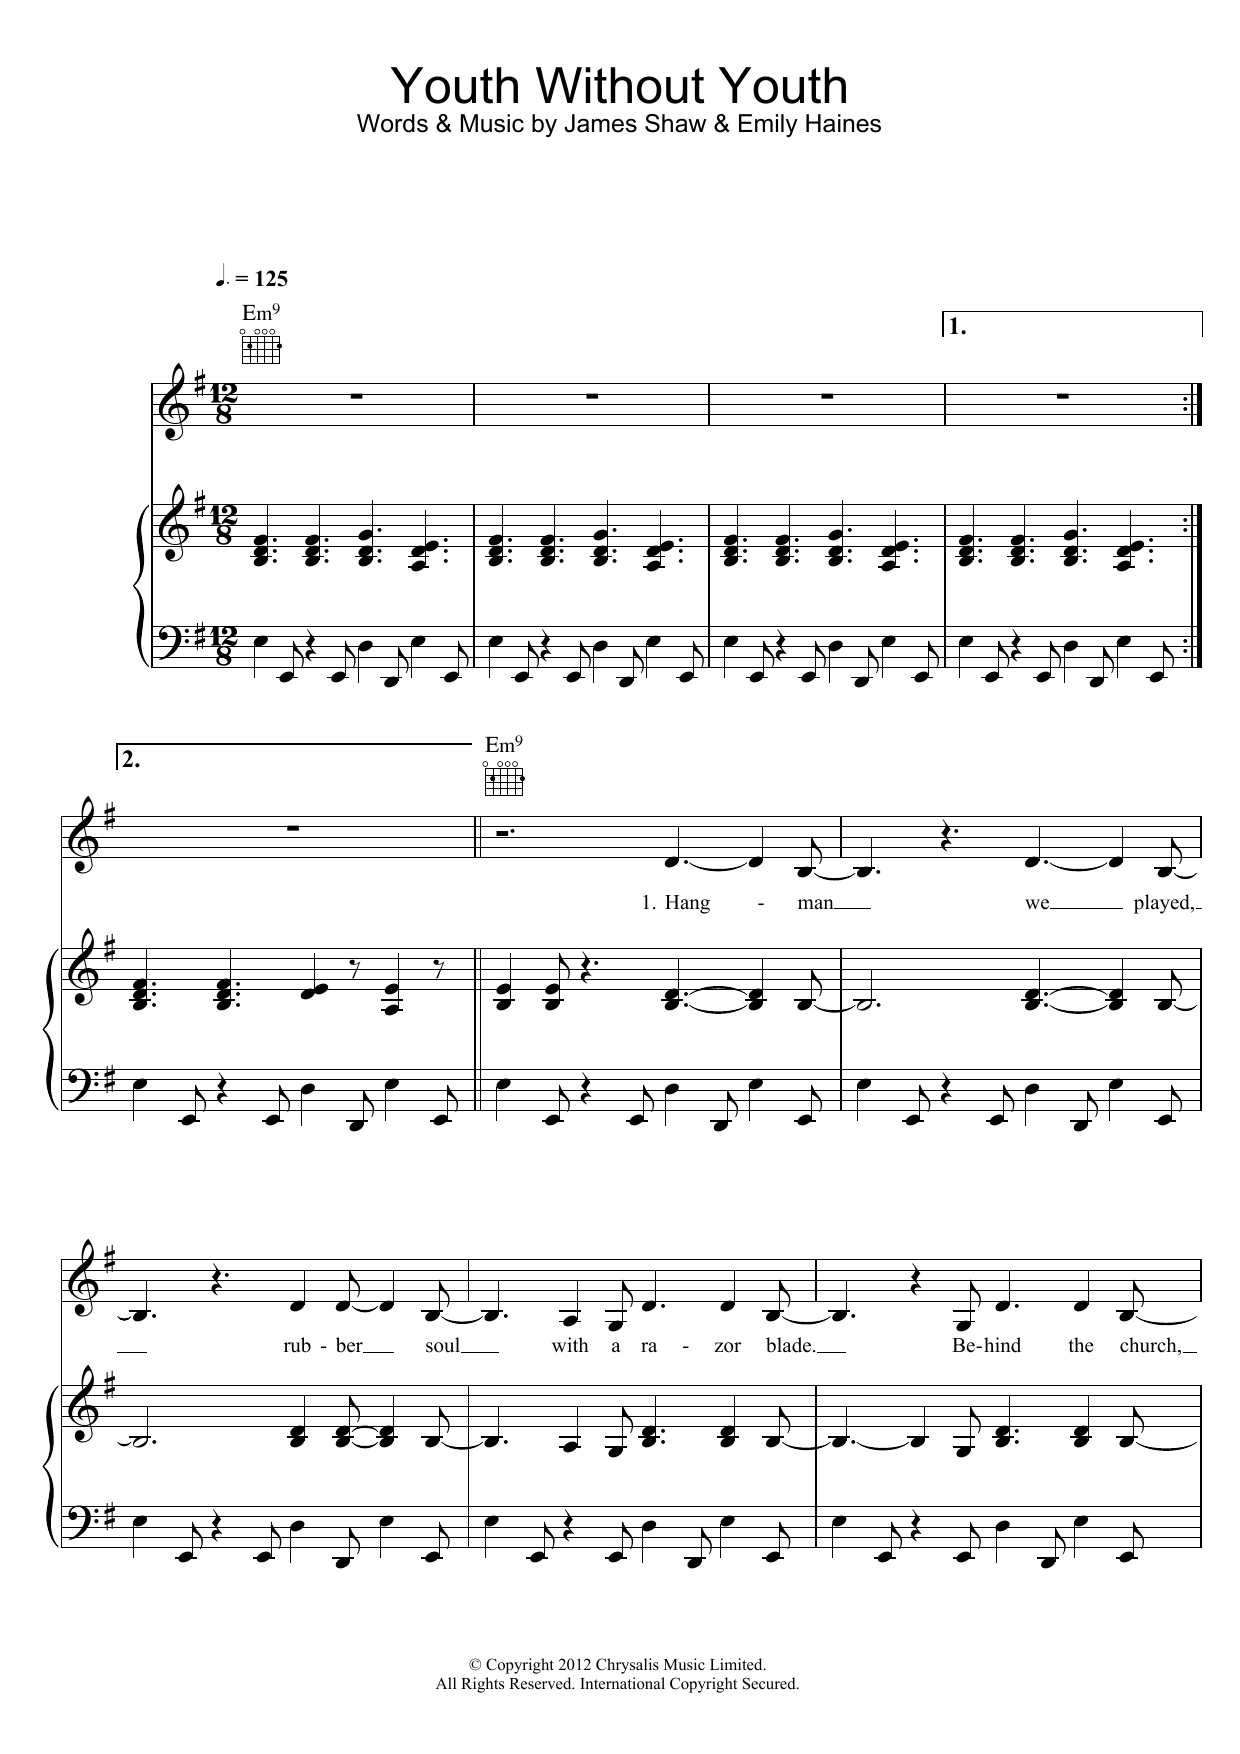 Download Metric Youth Without Youth Sheet Music